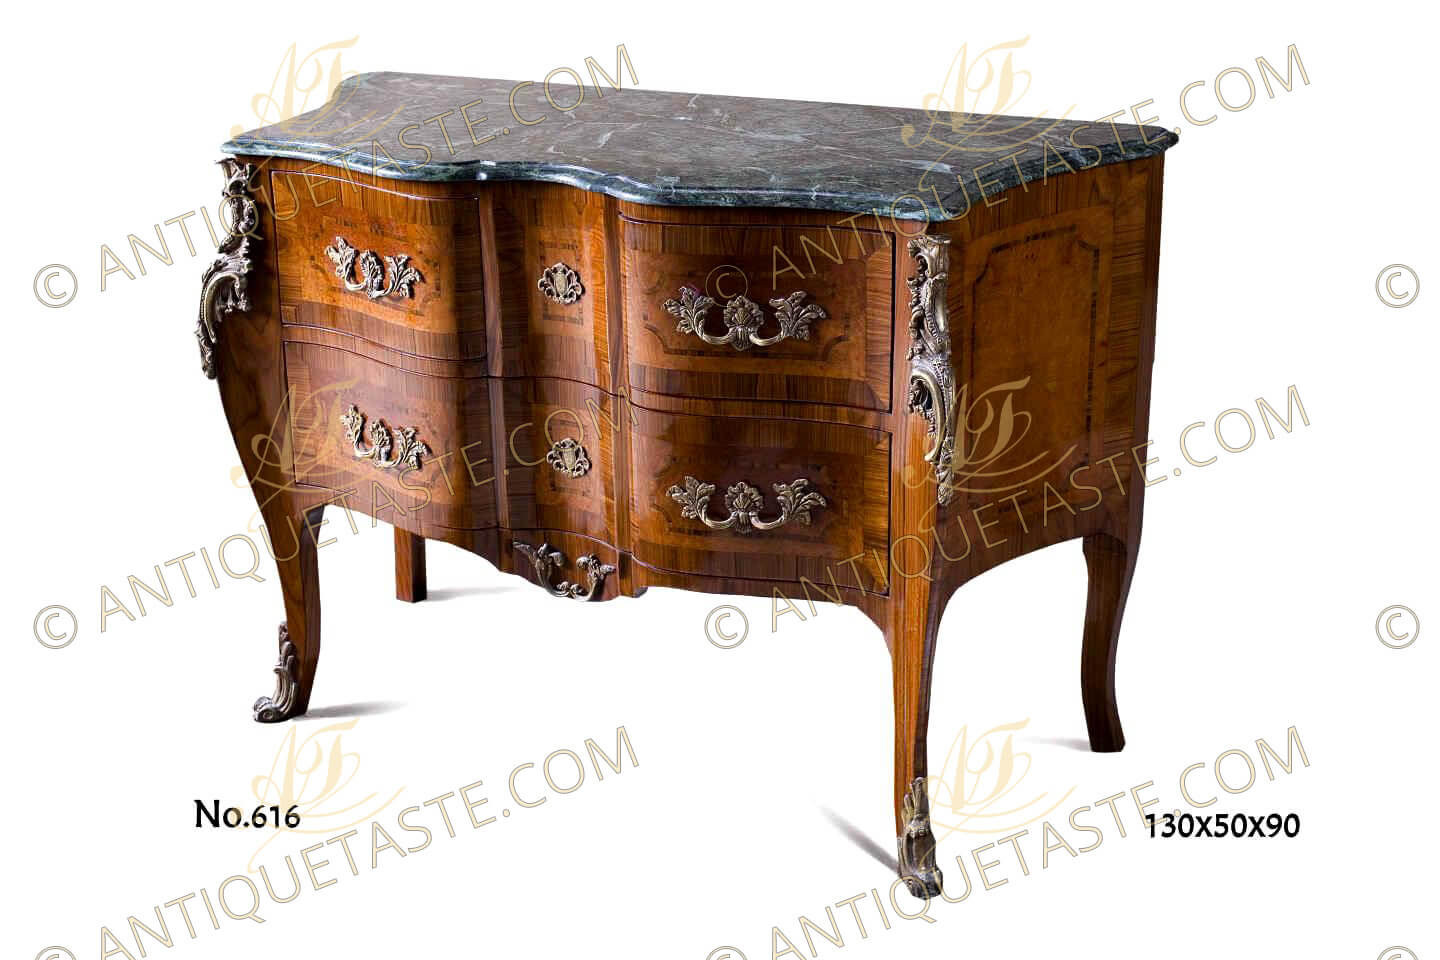 French 18th century Régence style Chest of Drawers